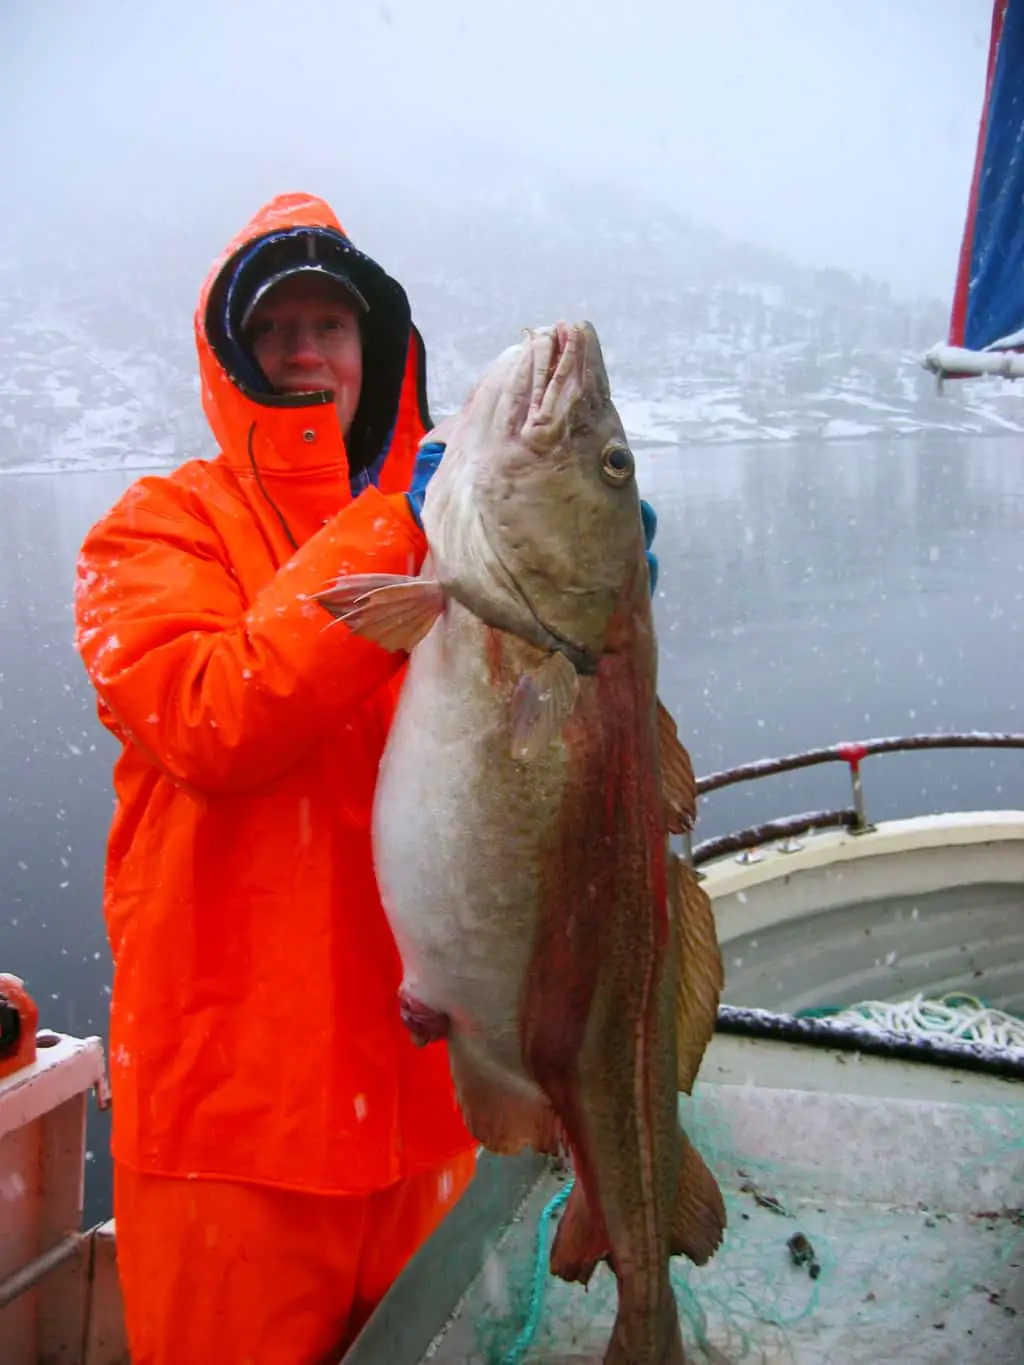 Huge Cod was held by a man standing on a fishing boat. But what are the differences between haddock vs cod